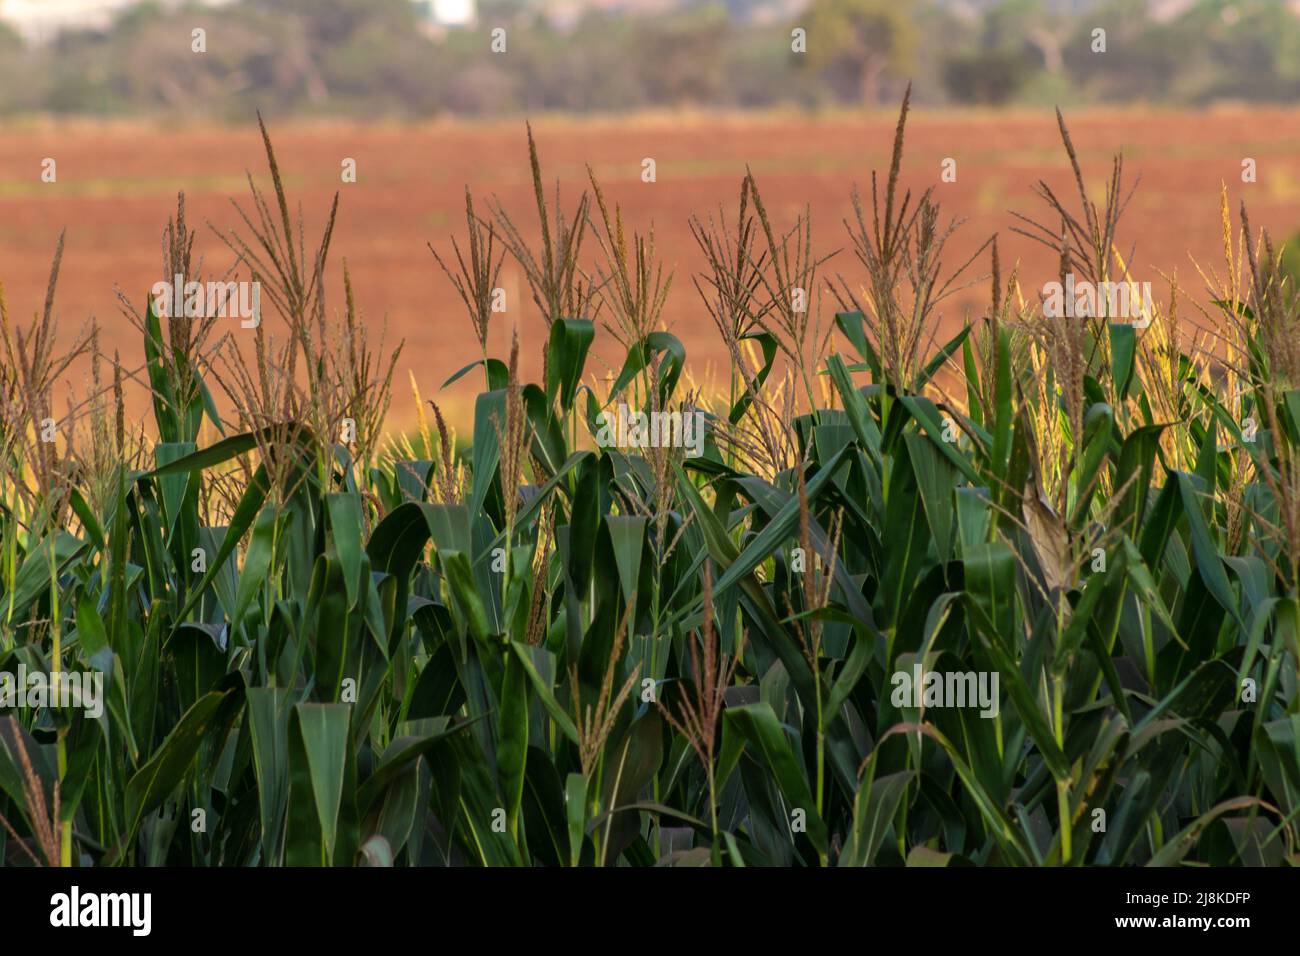 View of a green corn plantation in Brazil Stock Photo